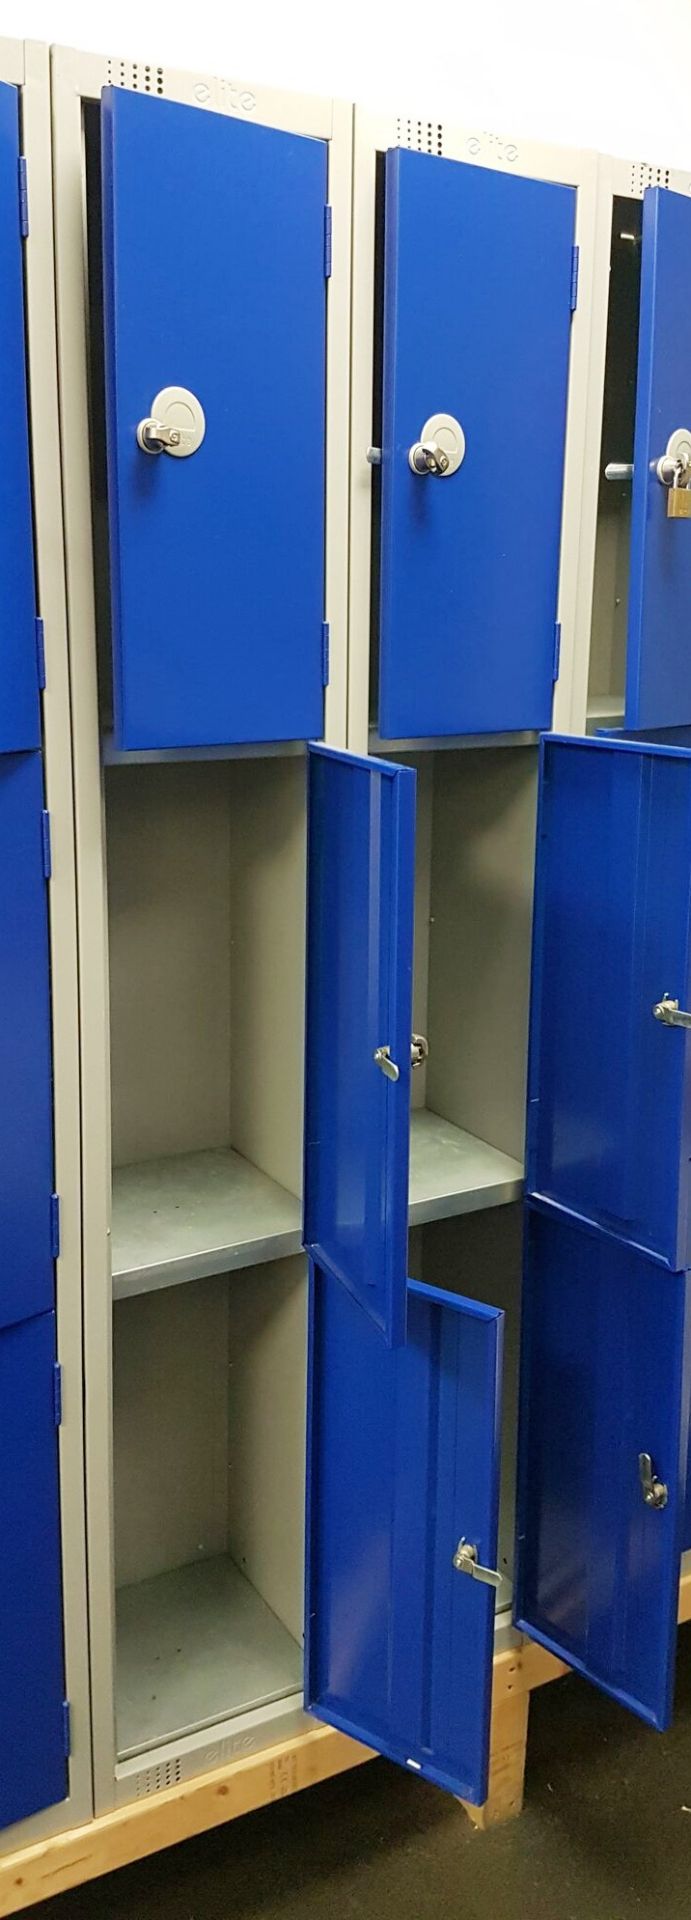 2 x Elite 3 Door Staff Clothes Lockers - Features Padlock Fittings, Welded and Riveted Steel - Image 3 of 5